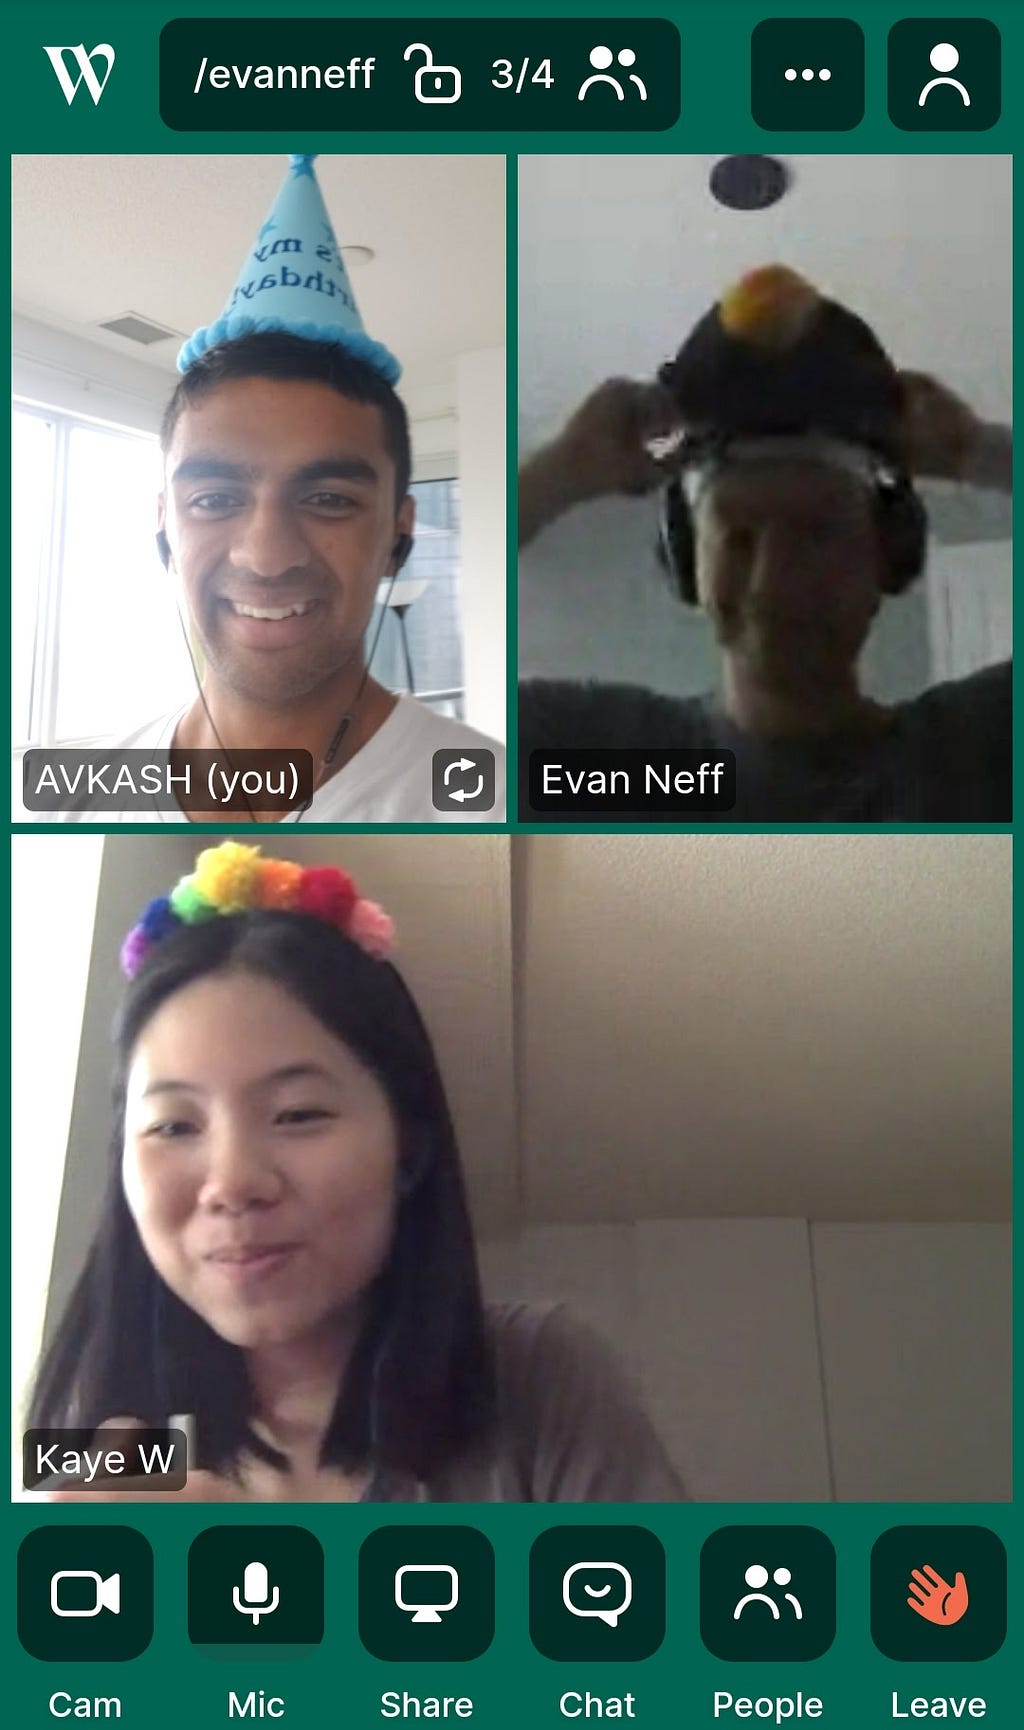 Screenshot of our morning check-in, featuring party hats and puffer fish